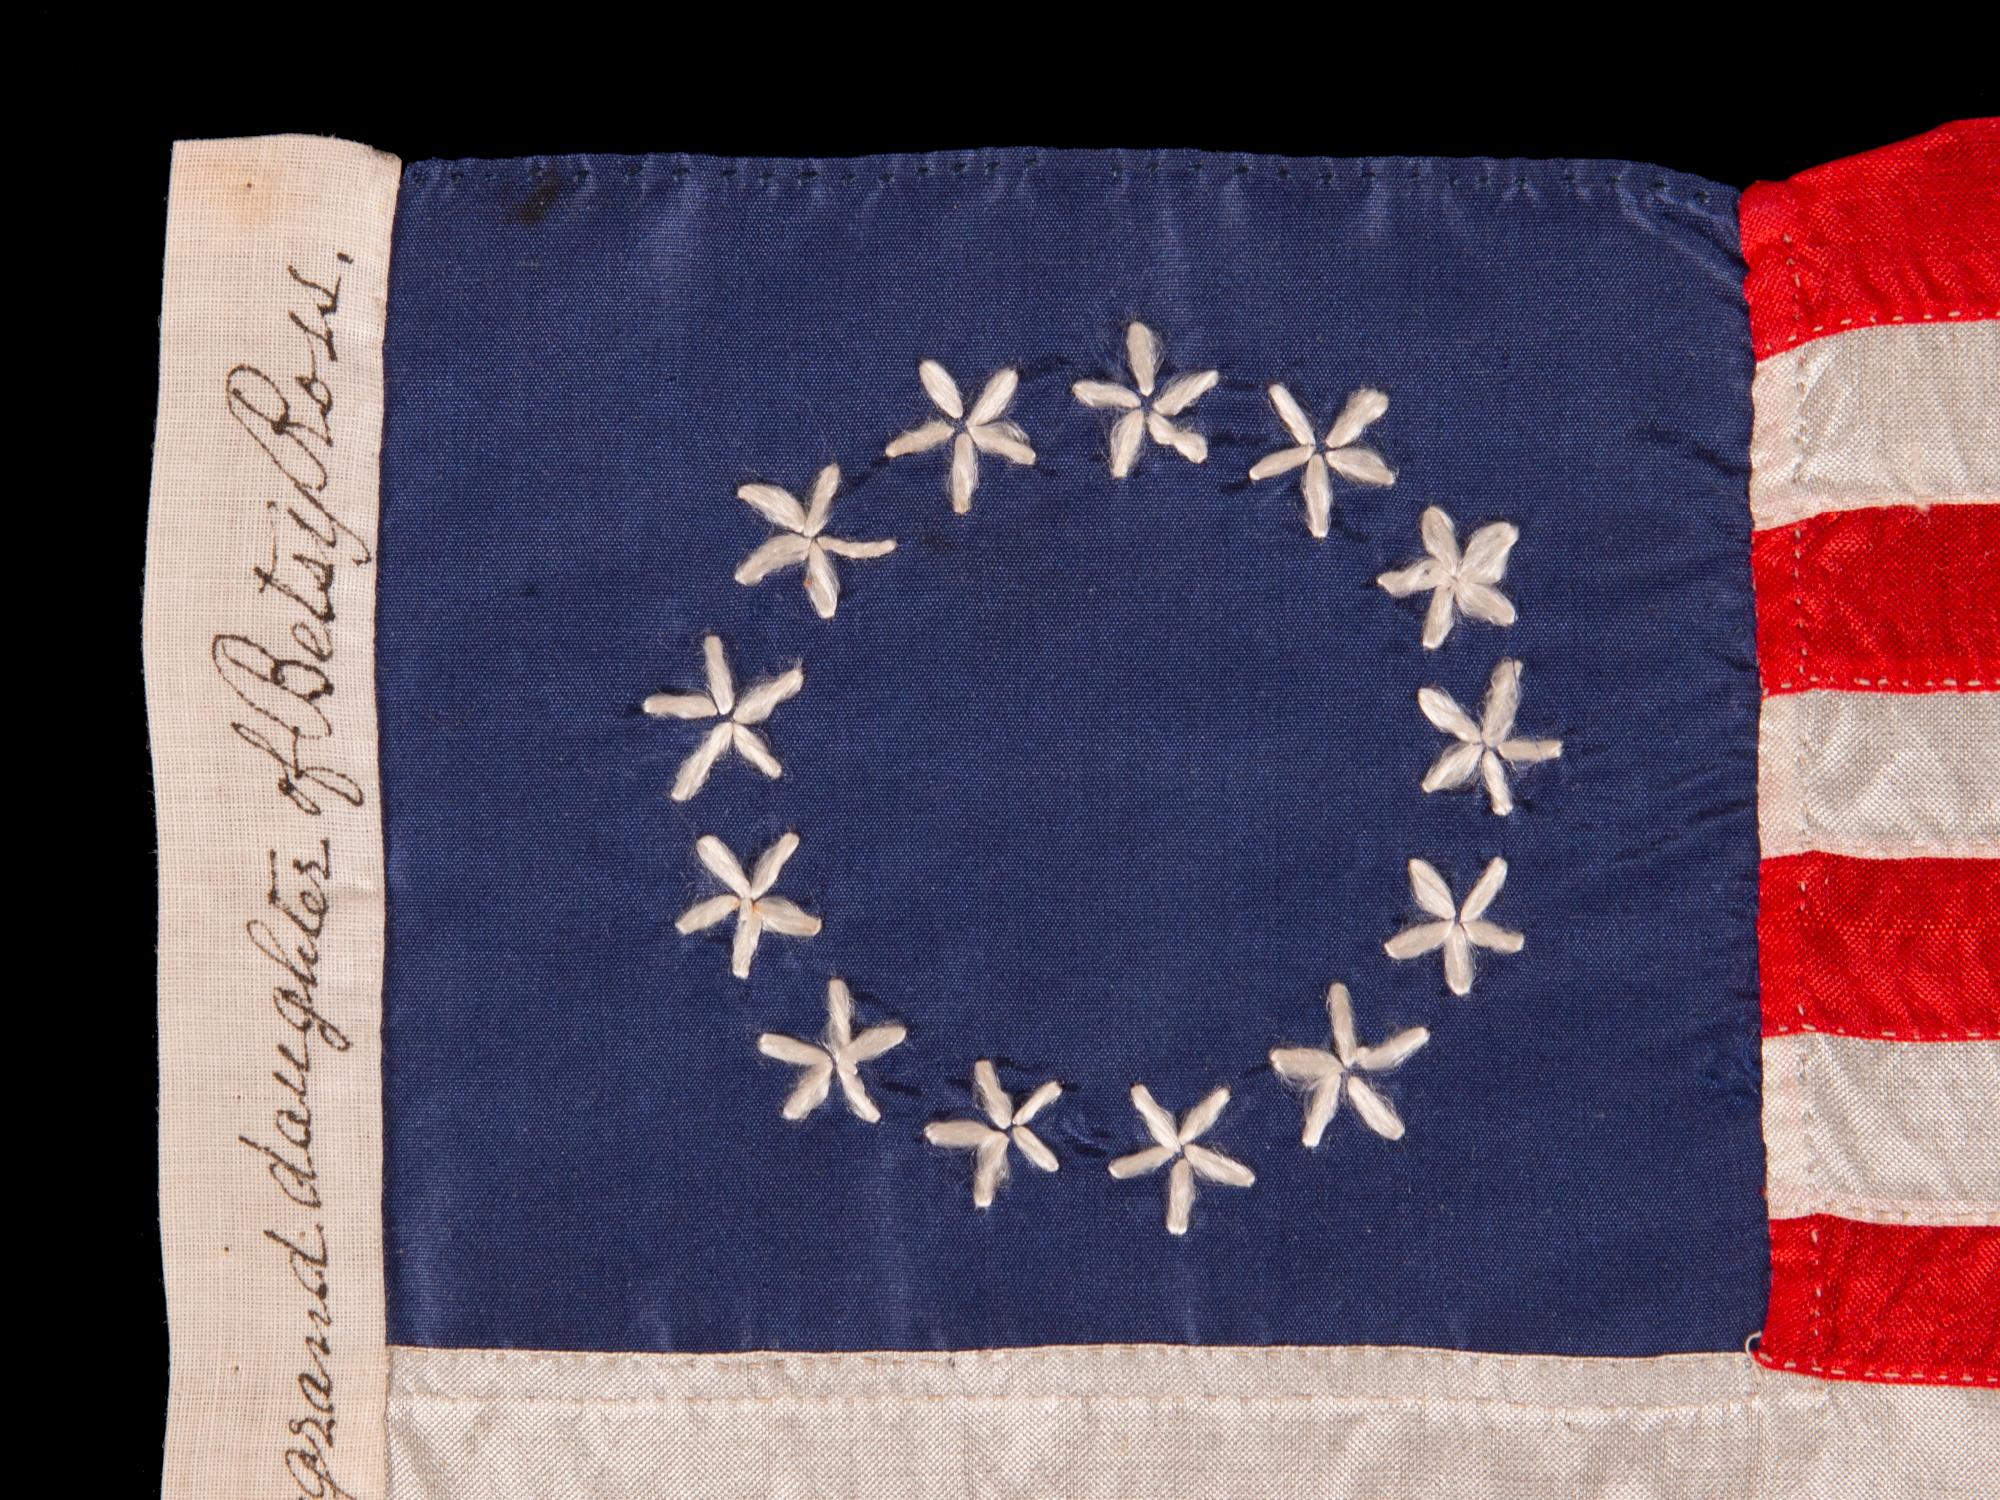 13 Hand-embroidered Stars And Expertly Hand-sewn Stripes On An Antique American Flag Made In Philadelphia By Sarah M. Wilson, Great-granddaughter Of Betsy Ross, Signed & Dated 1911

13 star American national flag, entirely hand-sewn by Sarah M.